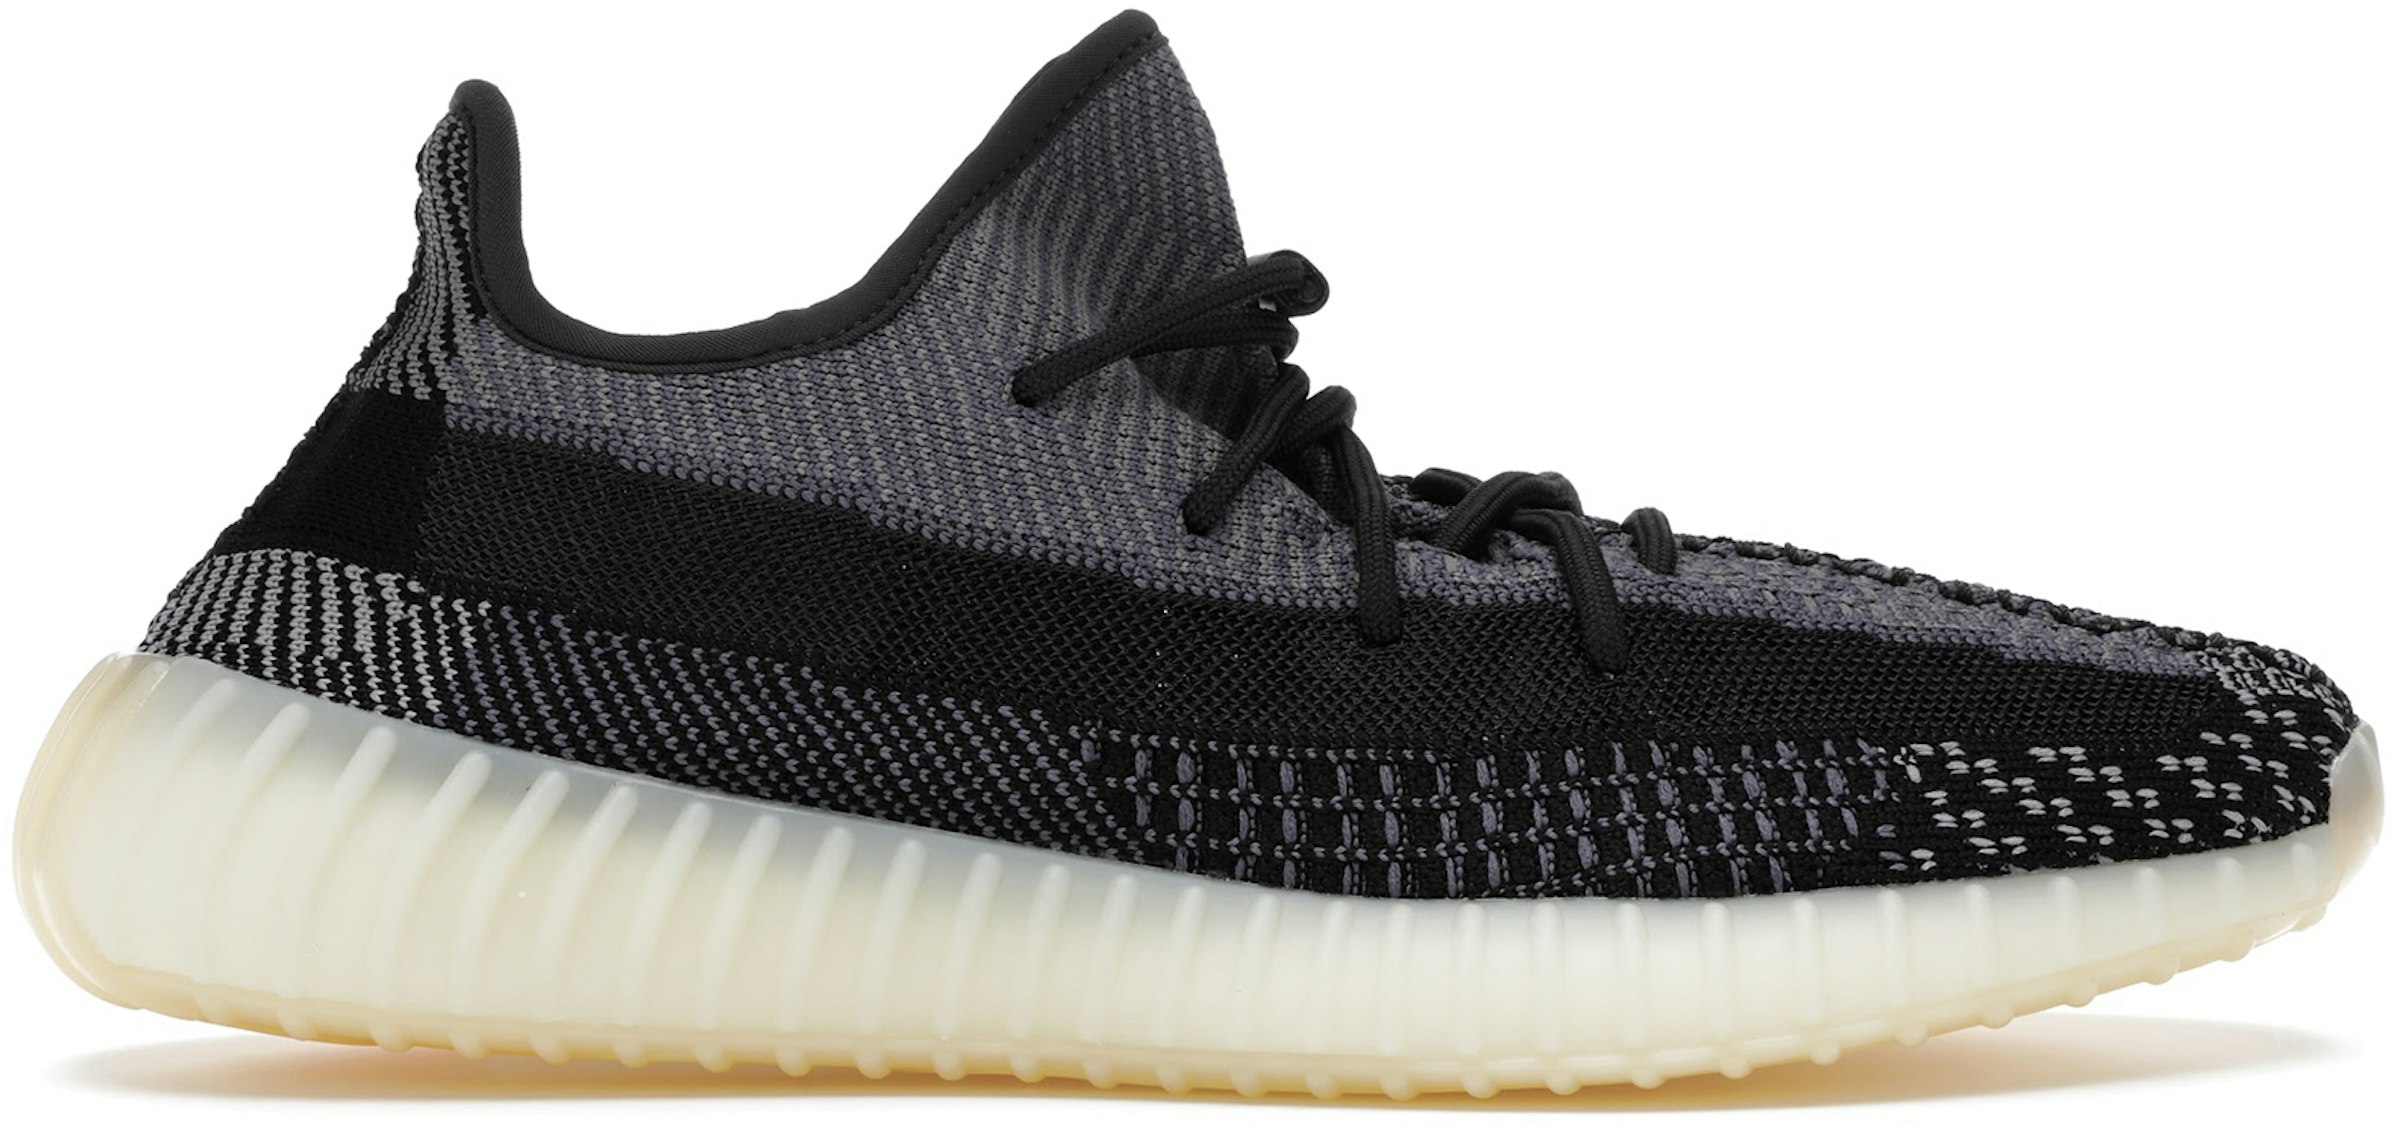 adidas Yeezy Boost 350 V2 Carbon - US